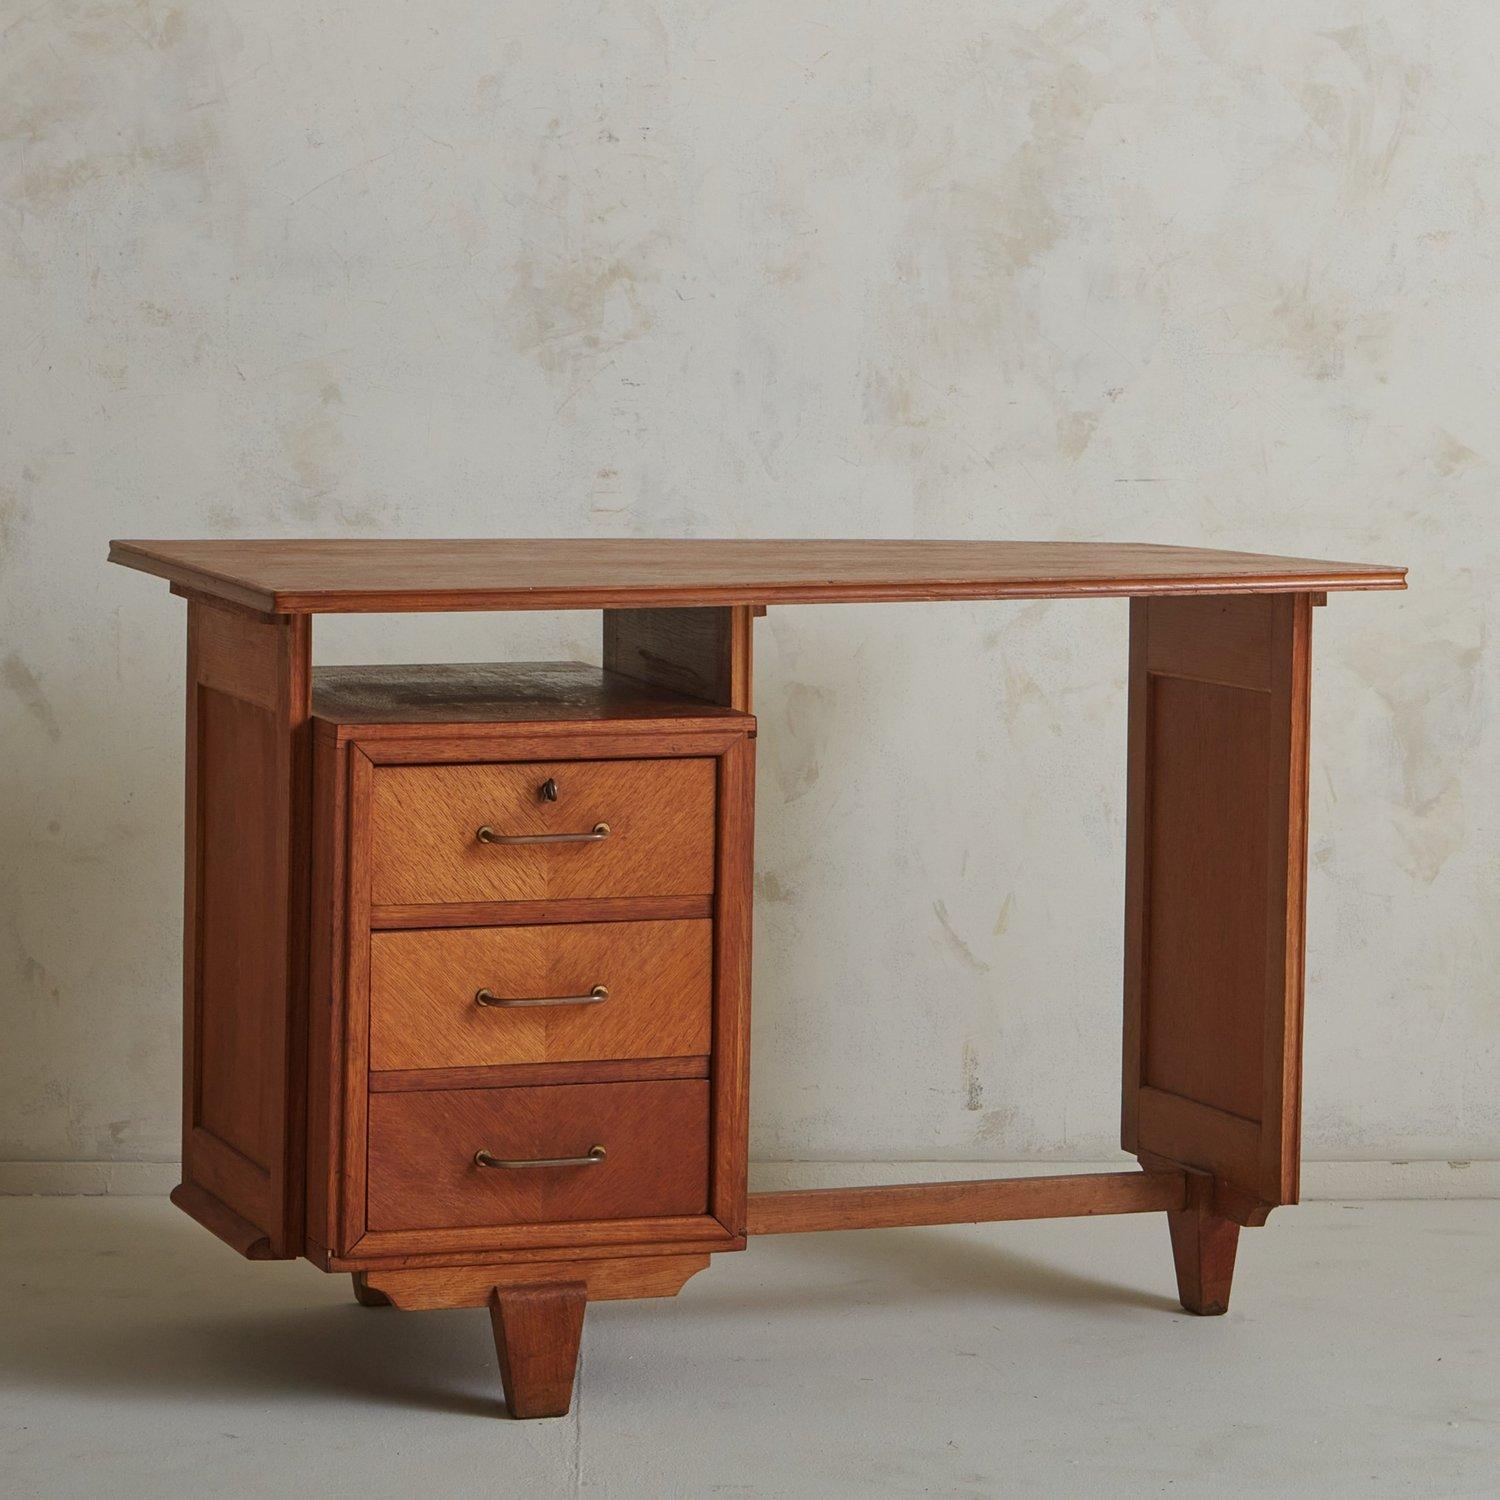 A 1950s French writing desk in the style of French design duo Guillerme et Chambron. This desk was beautifully constructed using oak with gorgeous wood graining and carved detailing. It has three drawers, the front of which feature a subtle